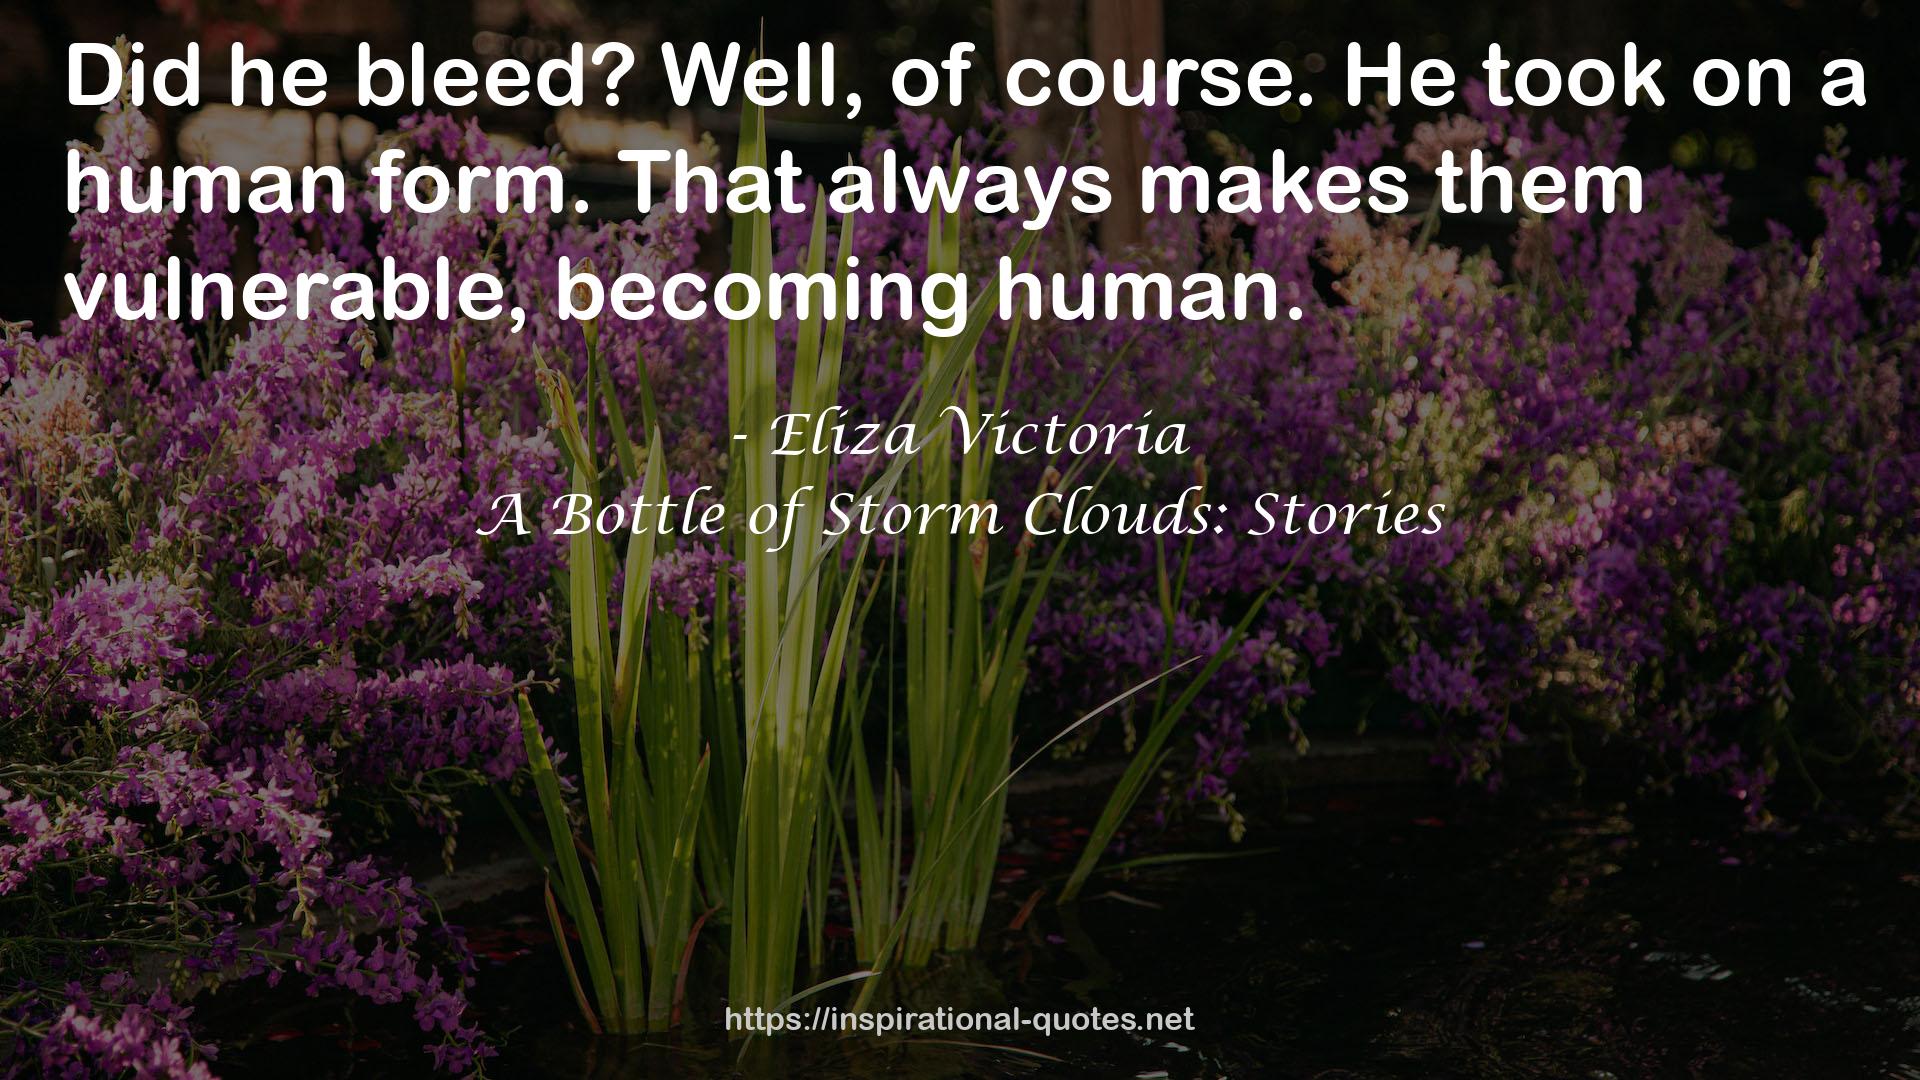 A Bottle of Storm Clouds: Stories QUOTES